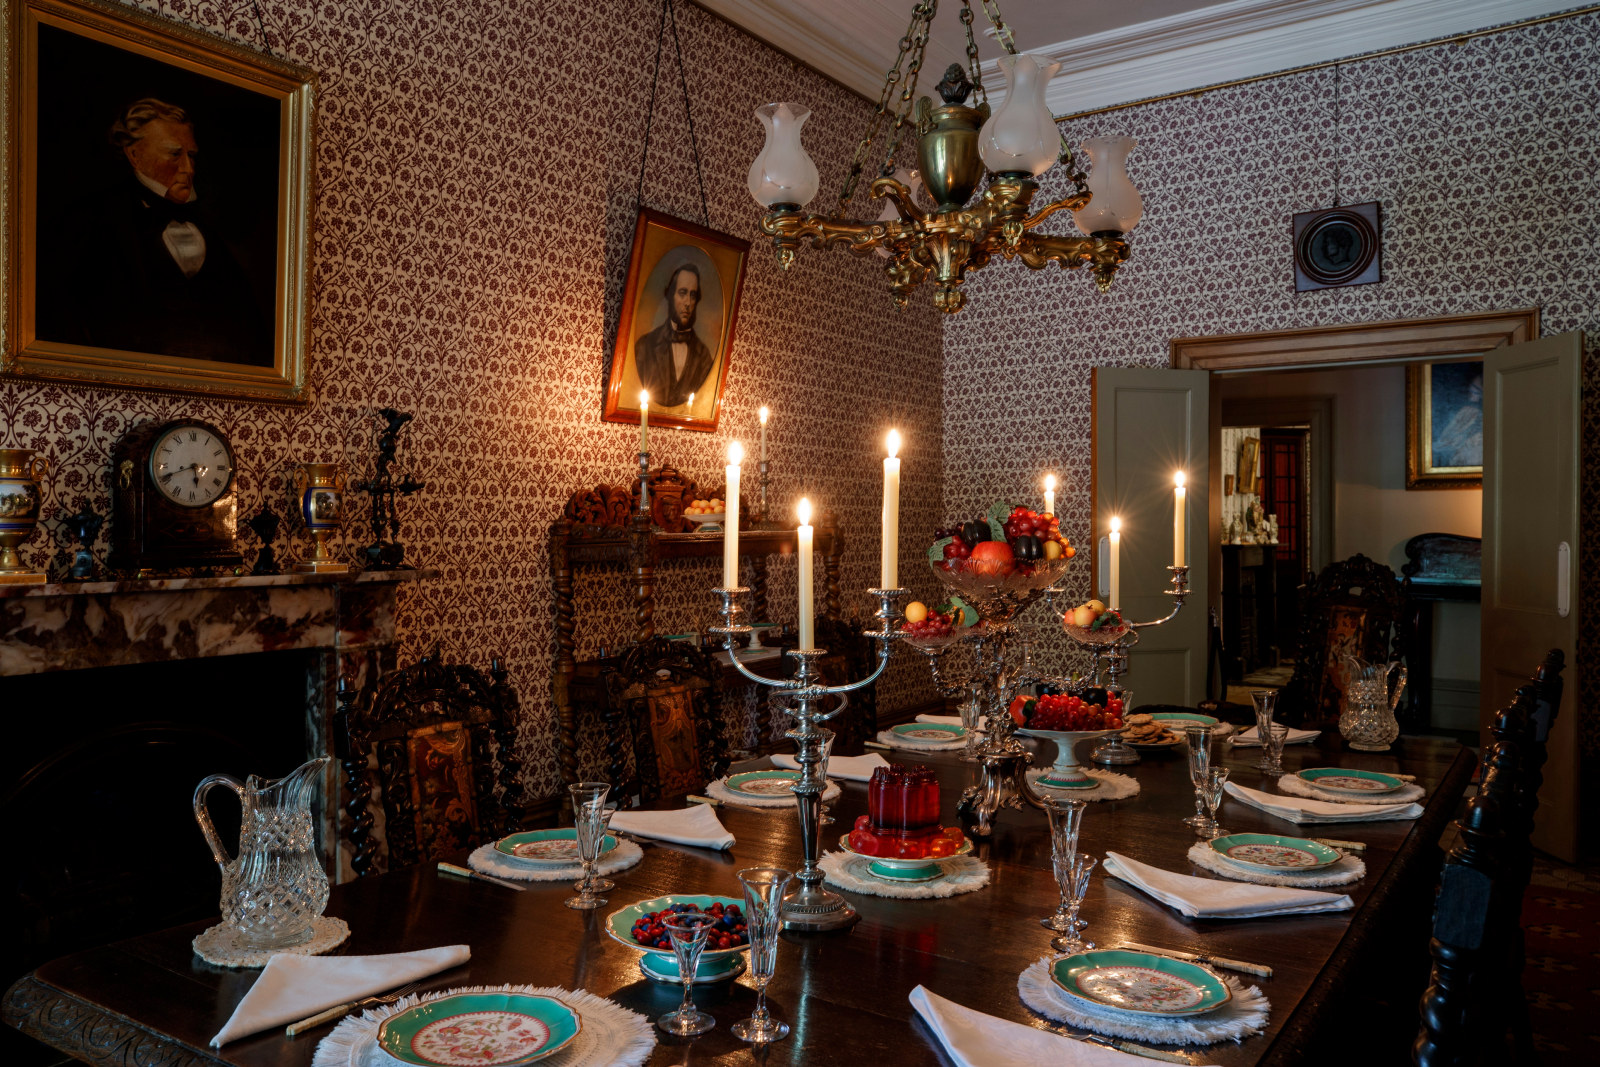 The Vaucluse House dining room fully set and lit by candlelight